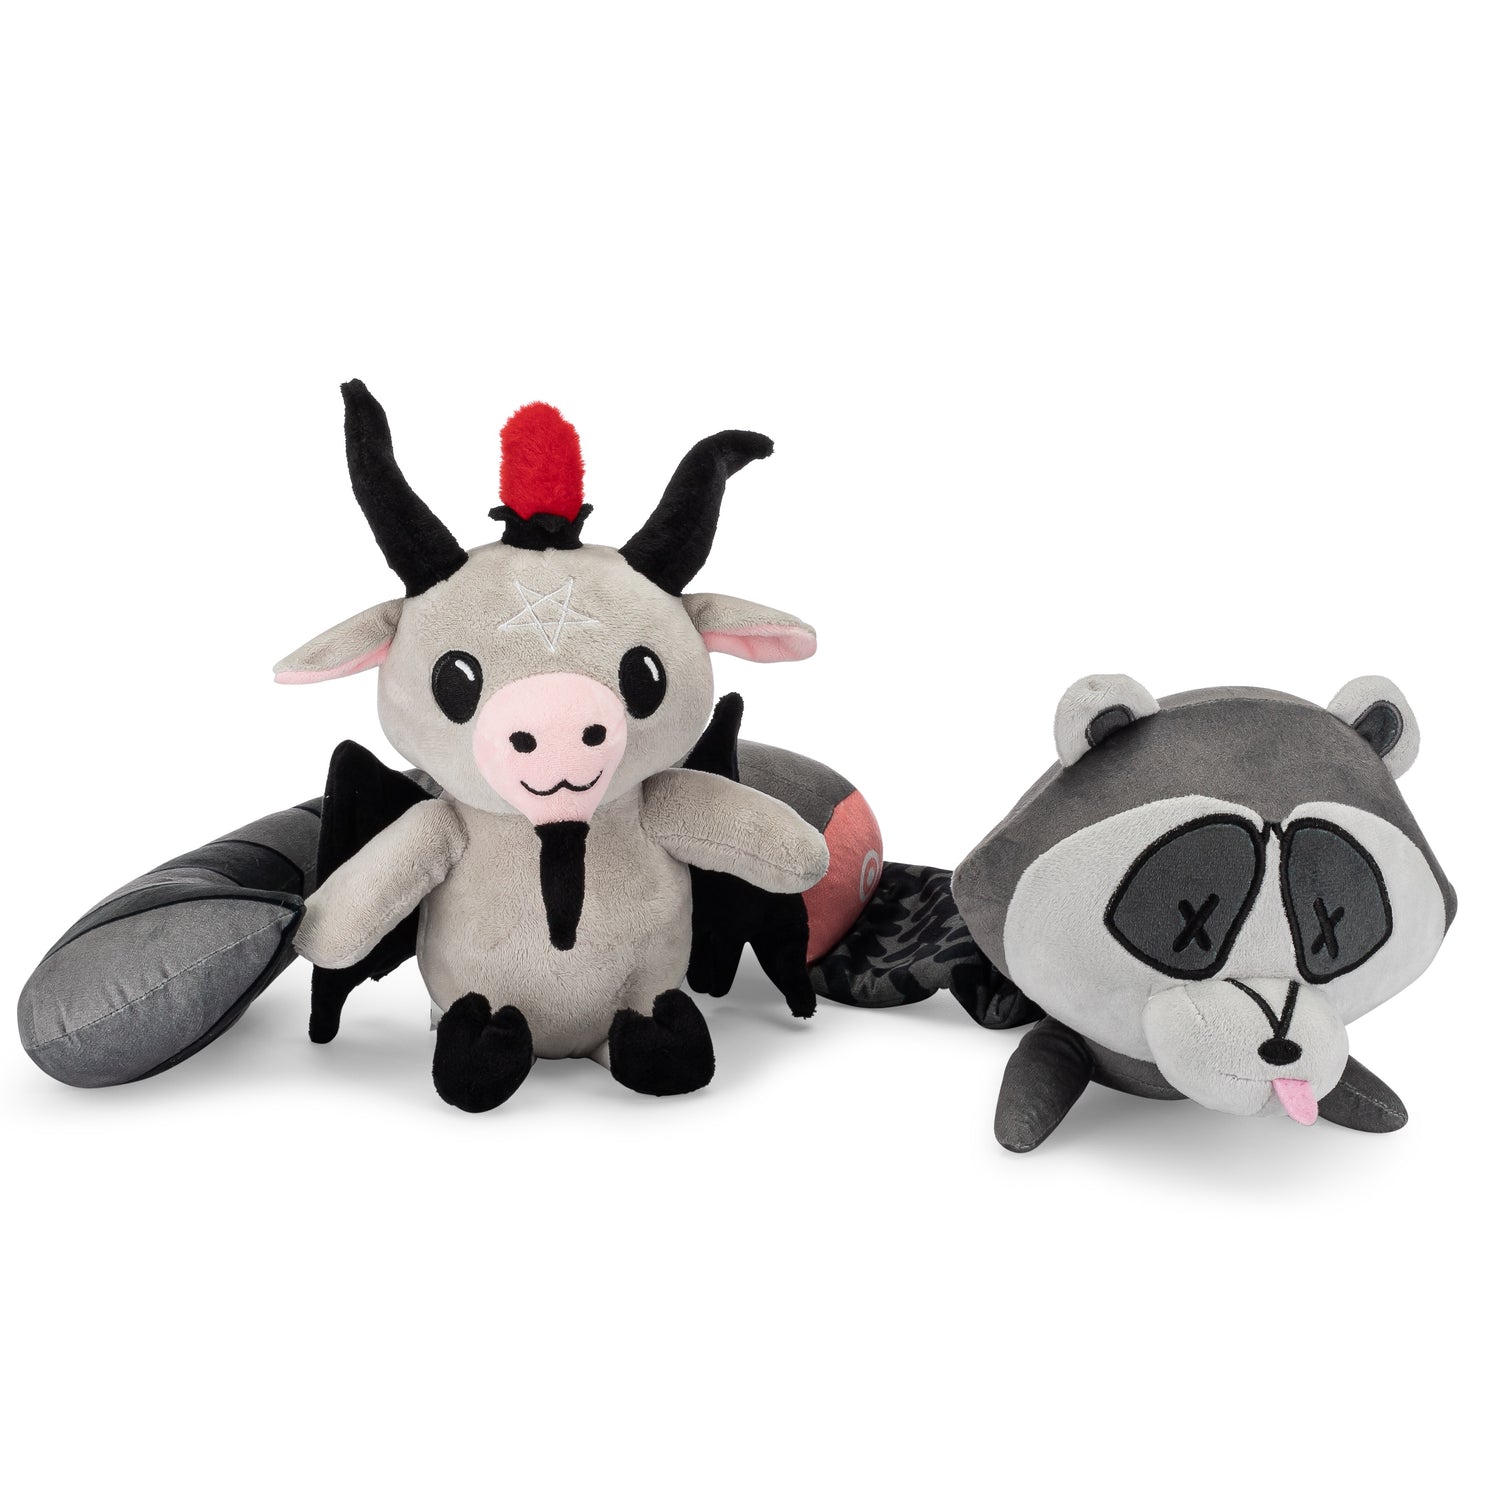 Baphy the baphomet plushie next to a roadkill raccoon plushie.